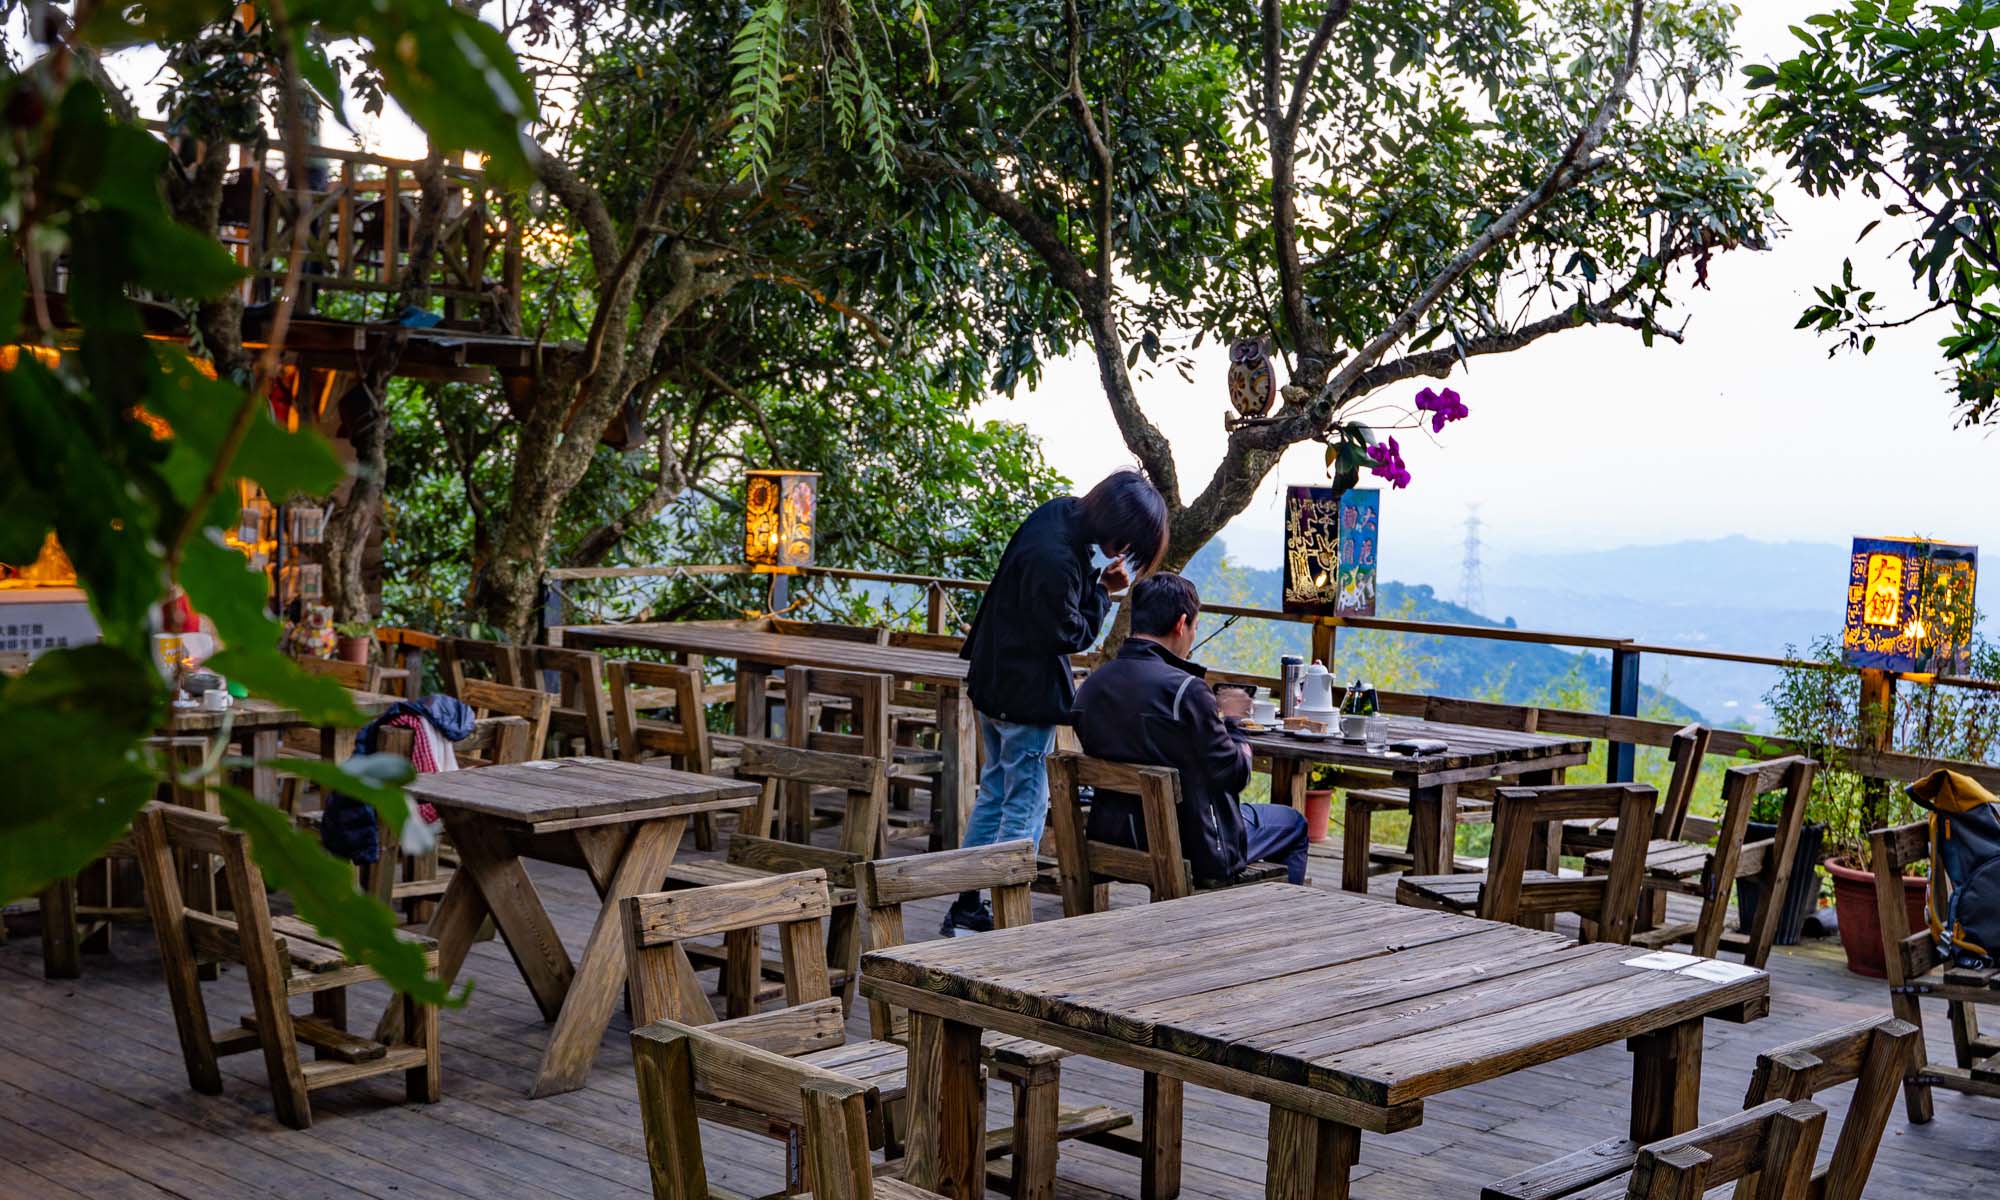 The view from Dachu Coffee Estate's handmade deck is very relaxing.